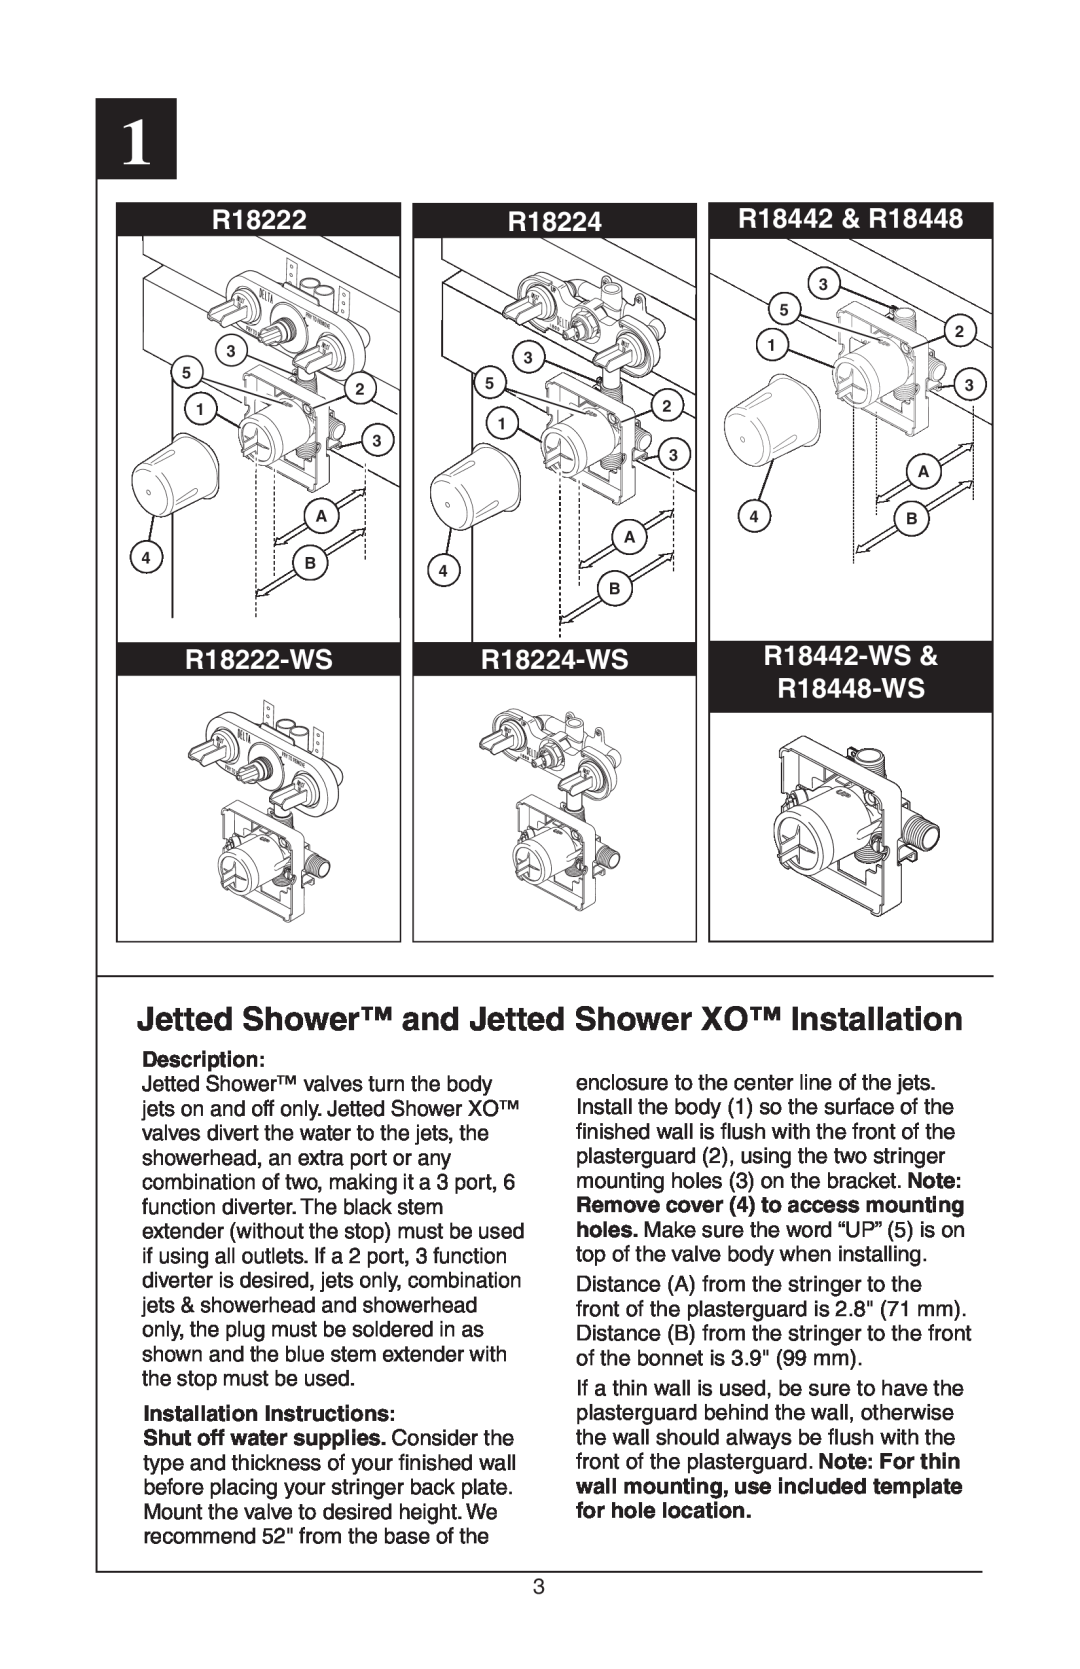 Delta Jetted Shower and Jetted Shower XO Installation, R18222-WS, R18224-WS, R18442 & R18448, Description 